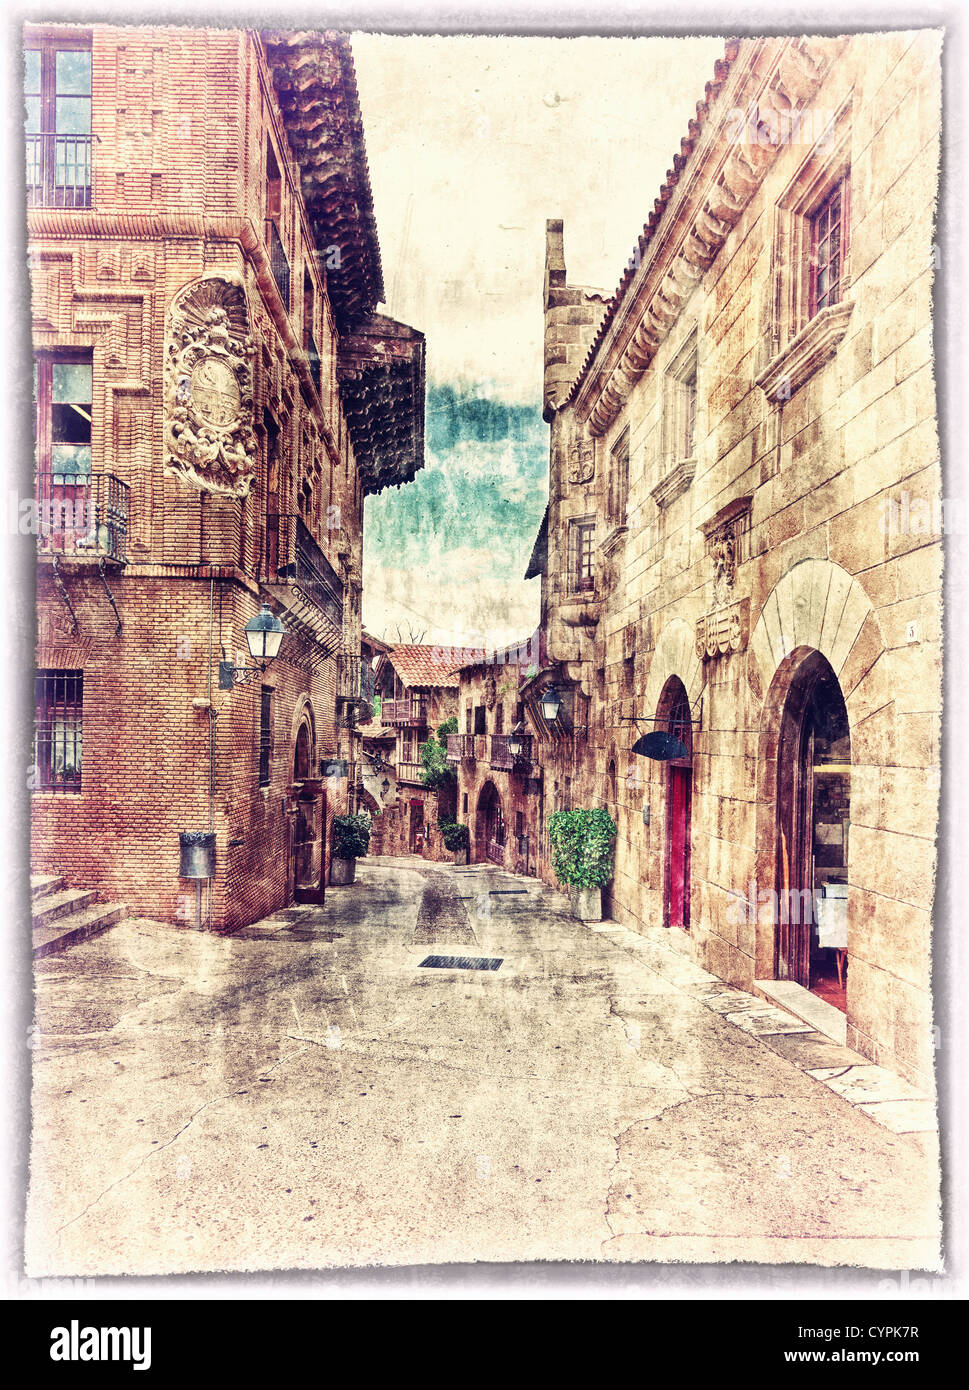 vintage style postcard of traditional architectural complex in Barcelona, Spain Stock Photo